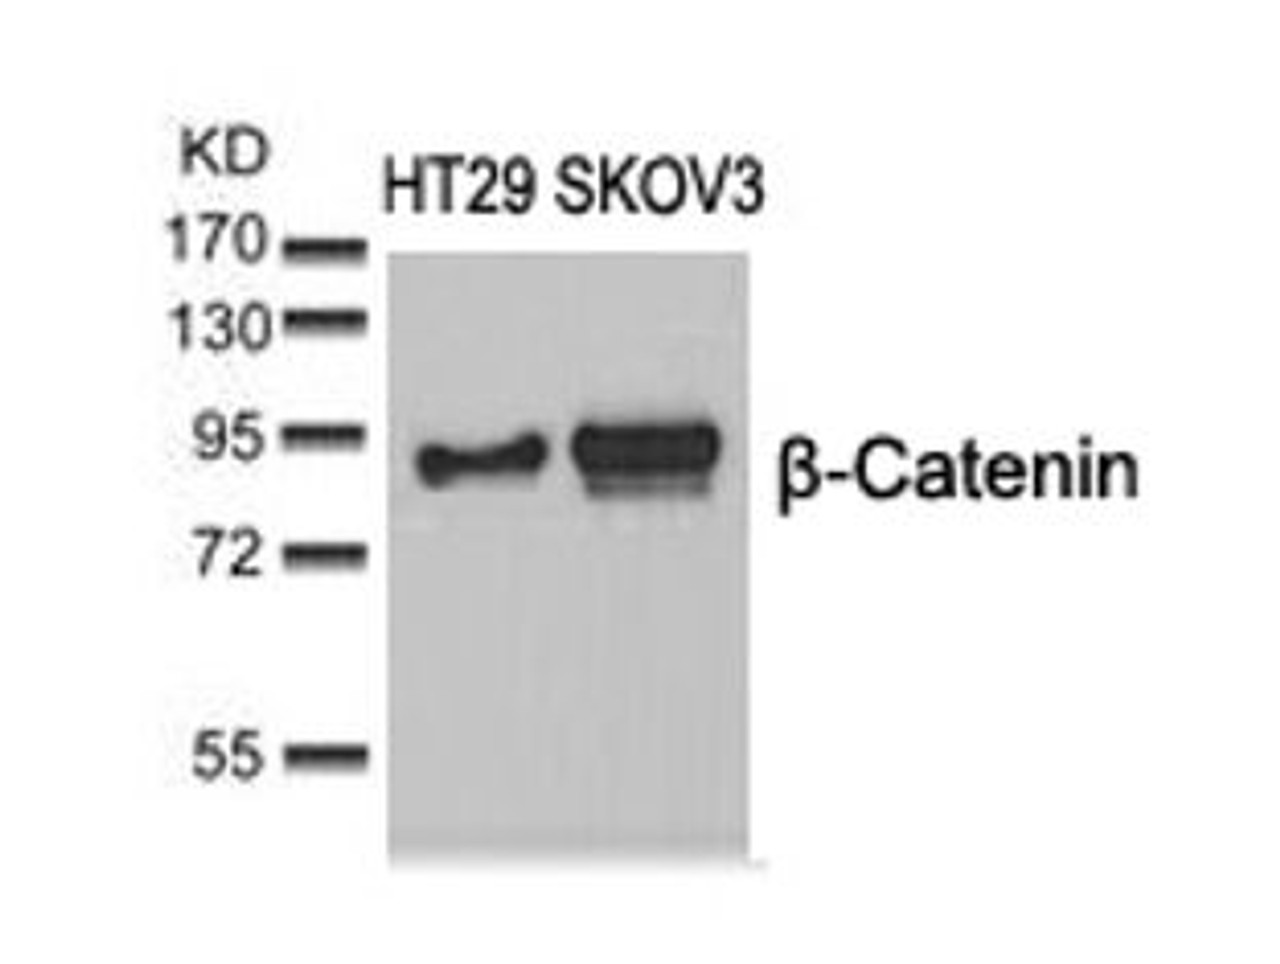 Western blot analysis of lysed extracts from HT29 and SKOV3 cells using &#946;-Catenin (Ab-37) .